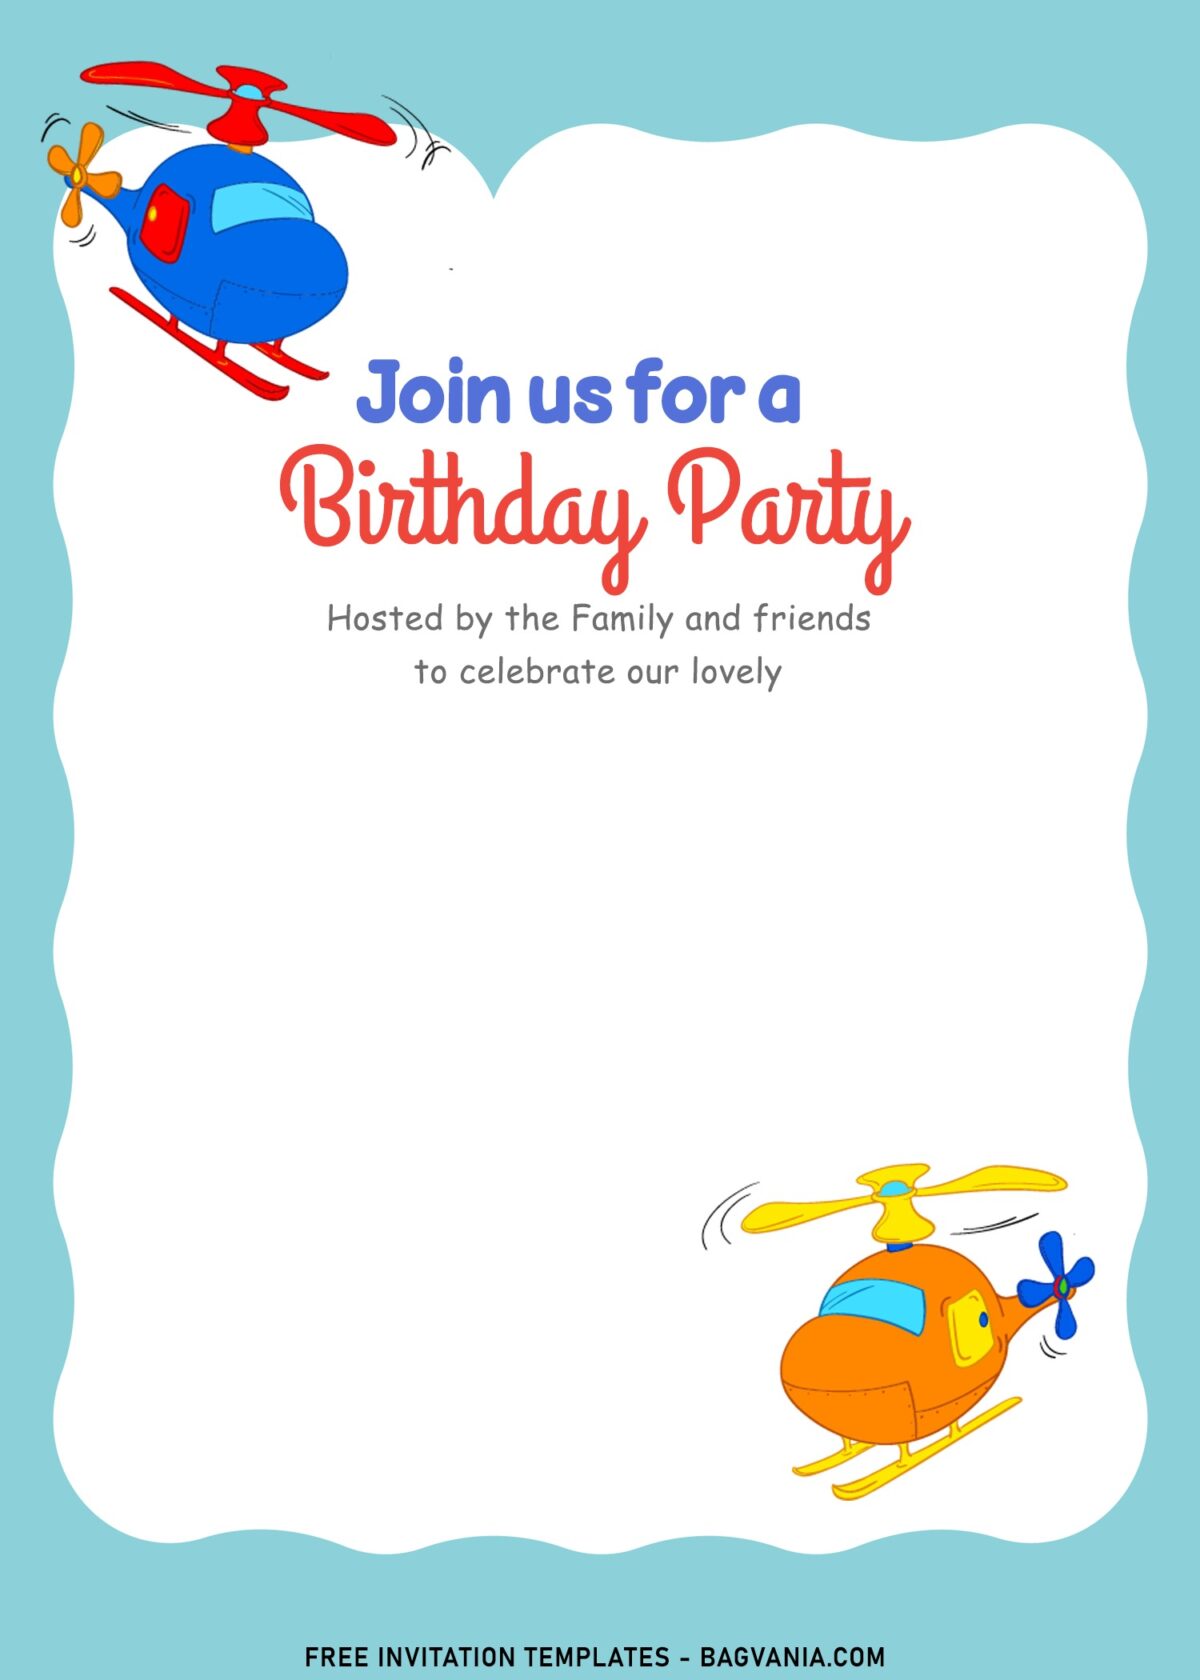 10+ Best And Cute Birthday Invitation Templates For Preschooler with helicopter toys